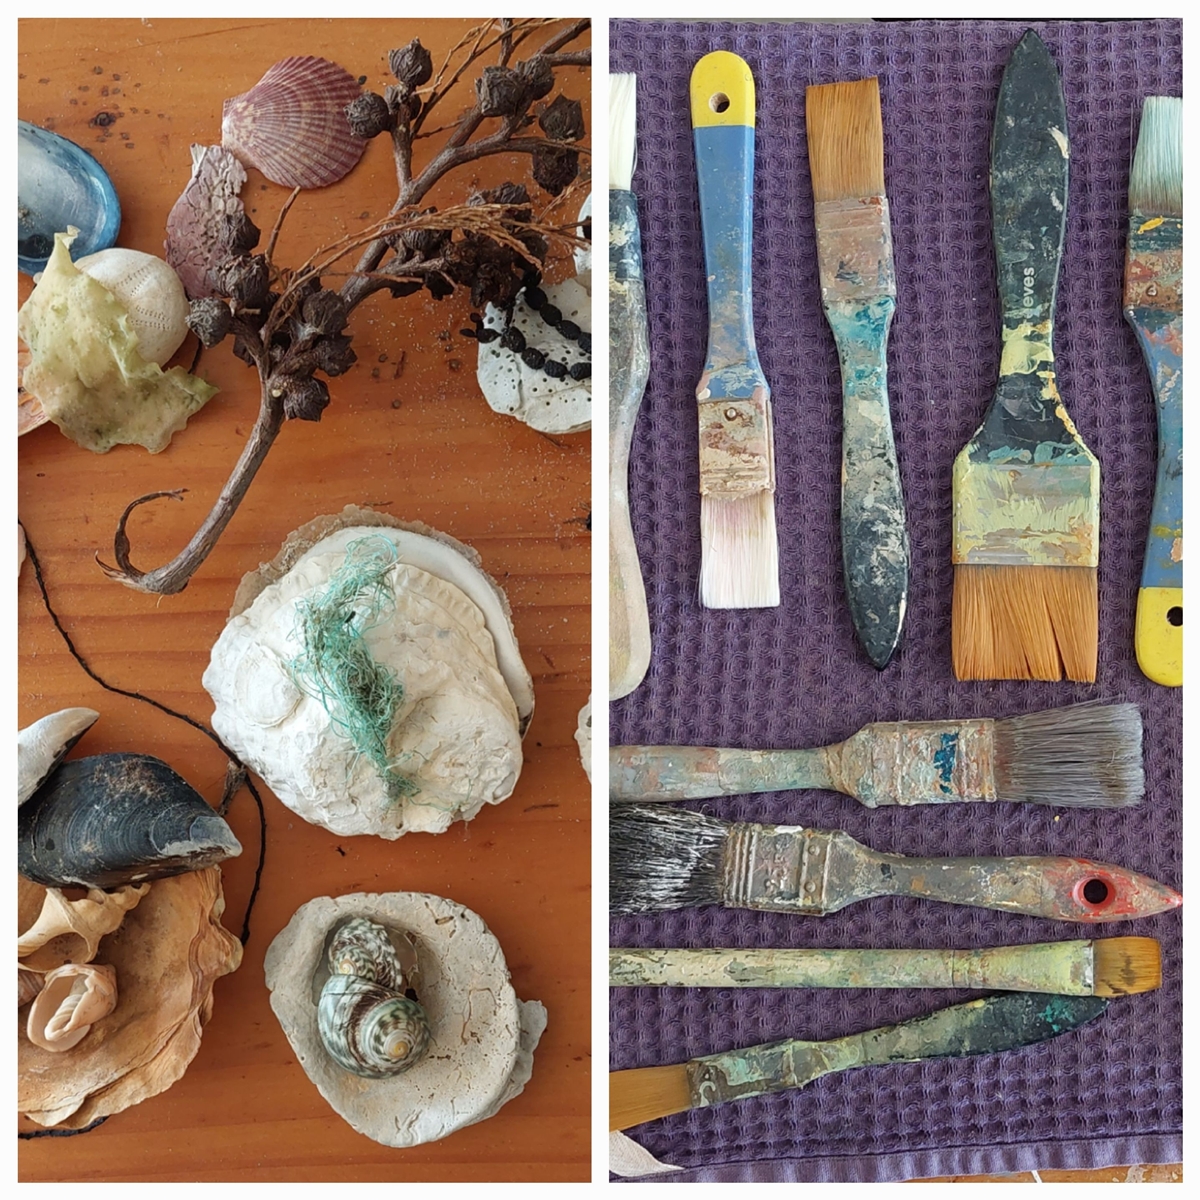 Image shows painting tools for Bruny Island artist Sarah L Stewart in her Artist Profile Story for Art Trails Tasmania